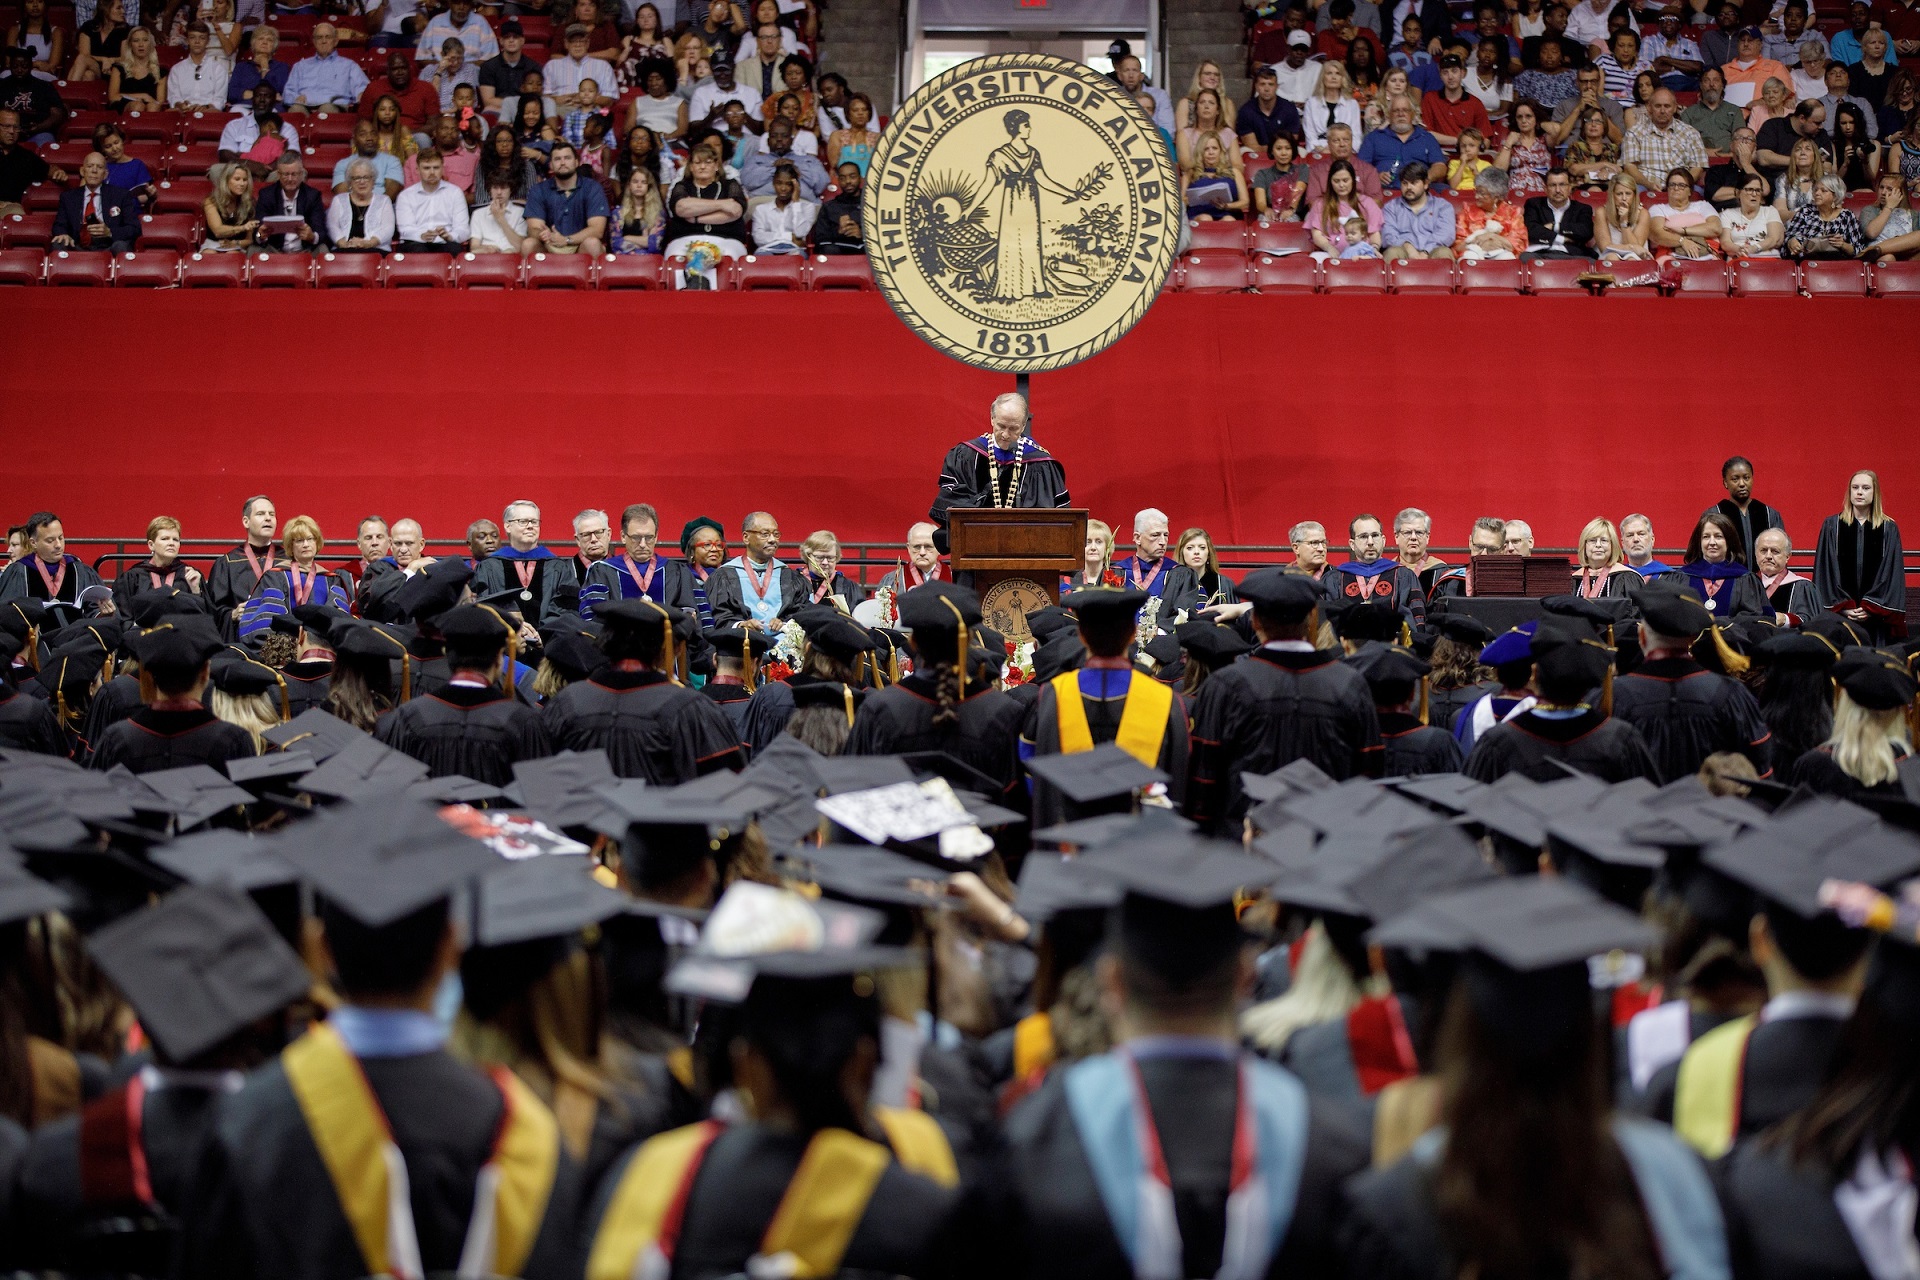 UA President Stuart R. Bell speaking at a commencement ceremony.